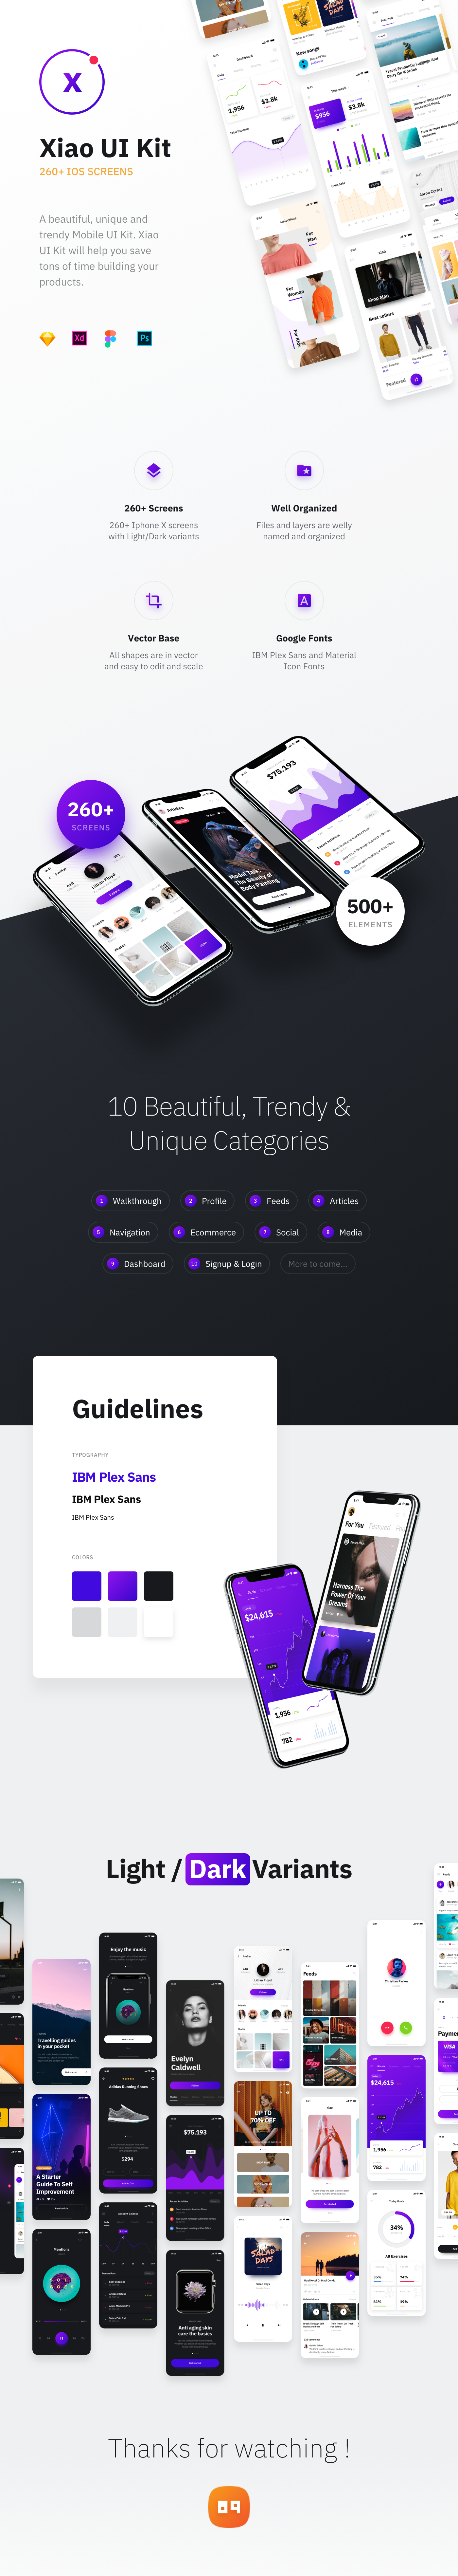 9cea4b69832517.5b8f16331ea69 - Xiao Mobile UI Kit for Sketch